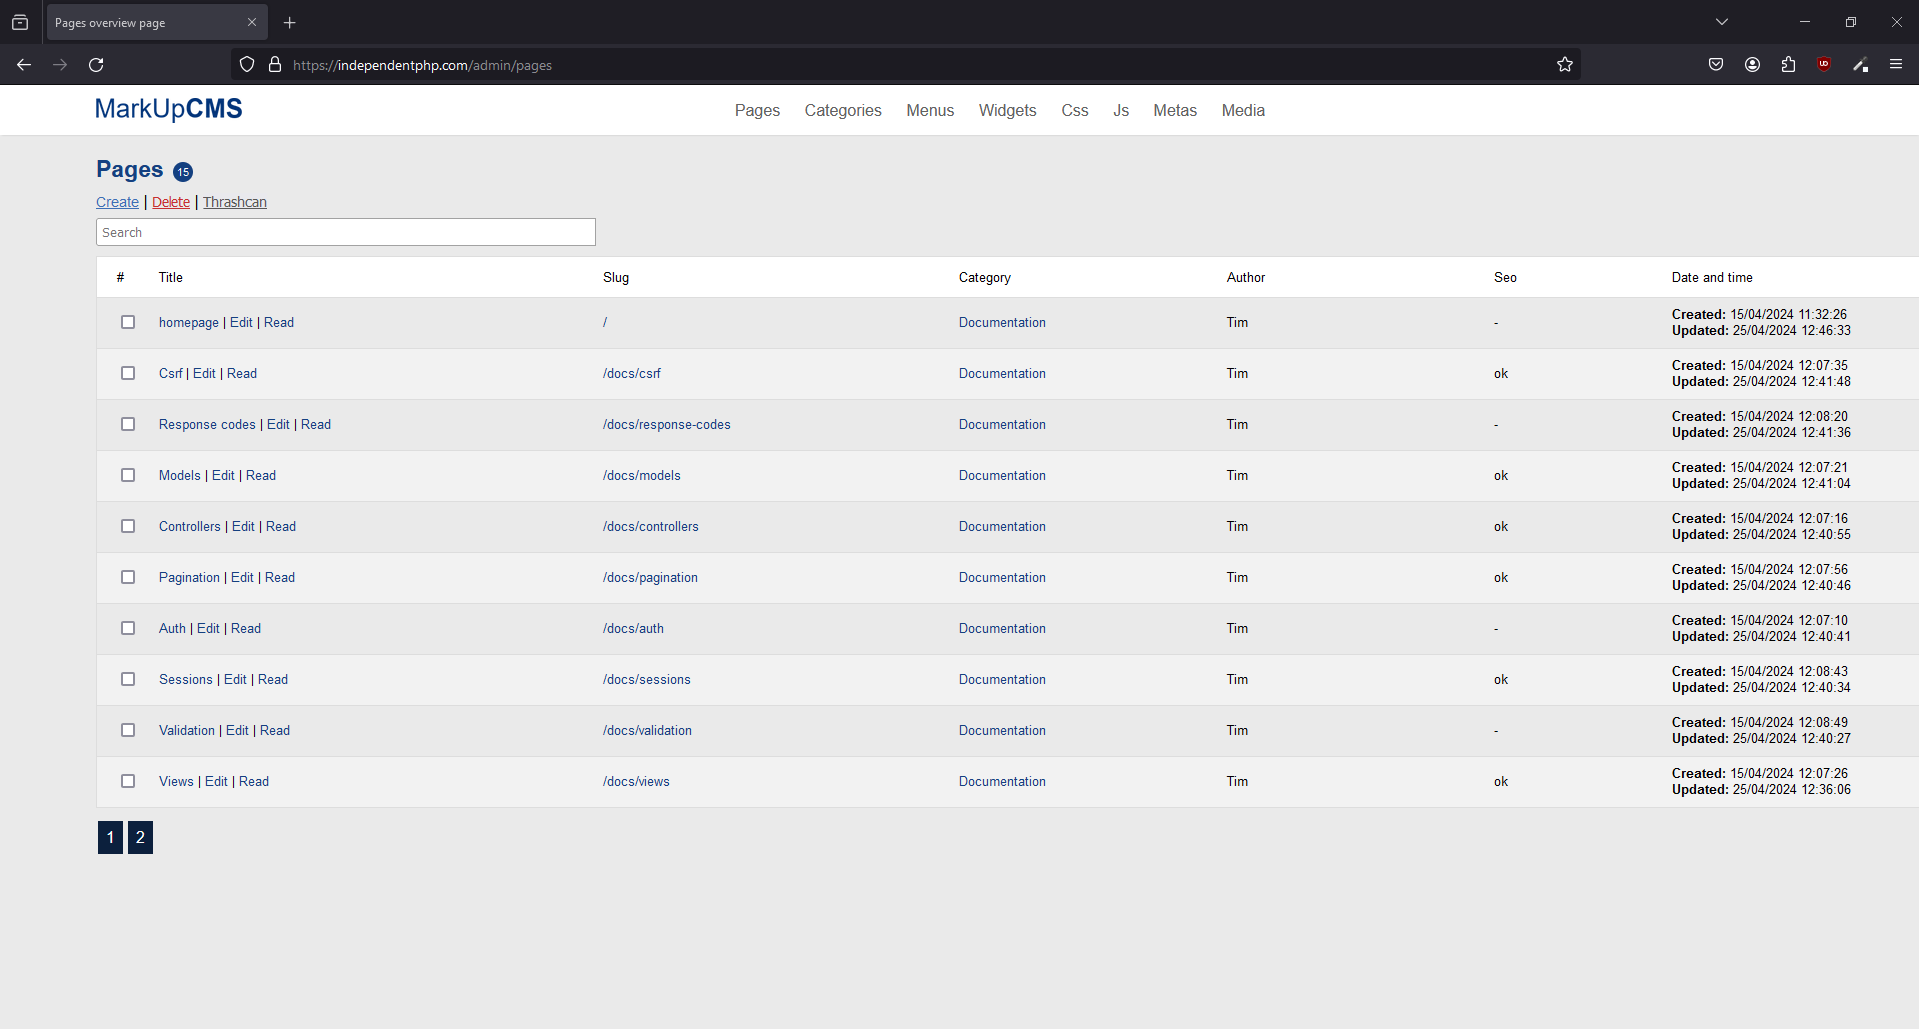 A screenshot of the pages index page in MarkUpCMS